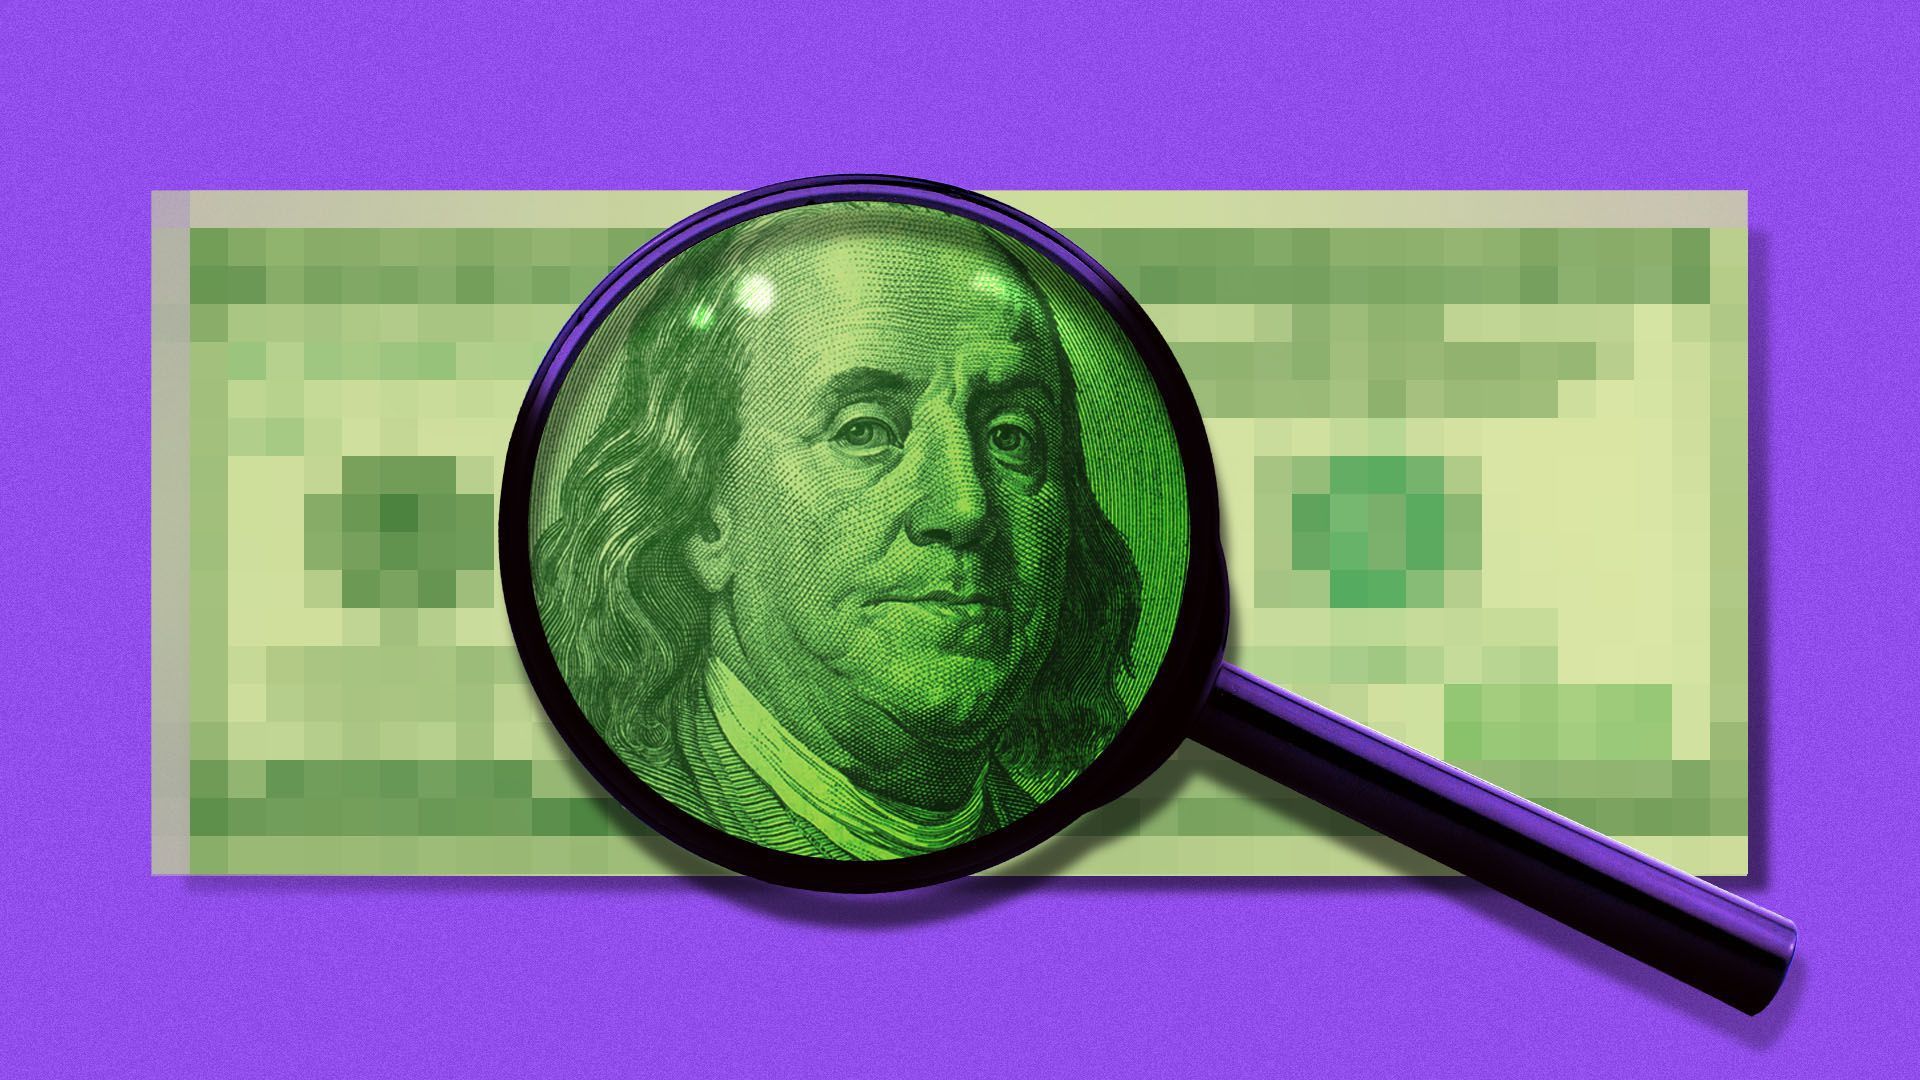 In illustration shots a magnifying glass over the image of Ben Franklin's face on U.S. currency.